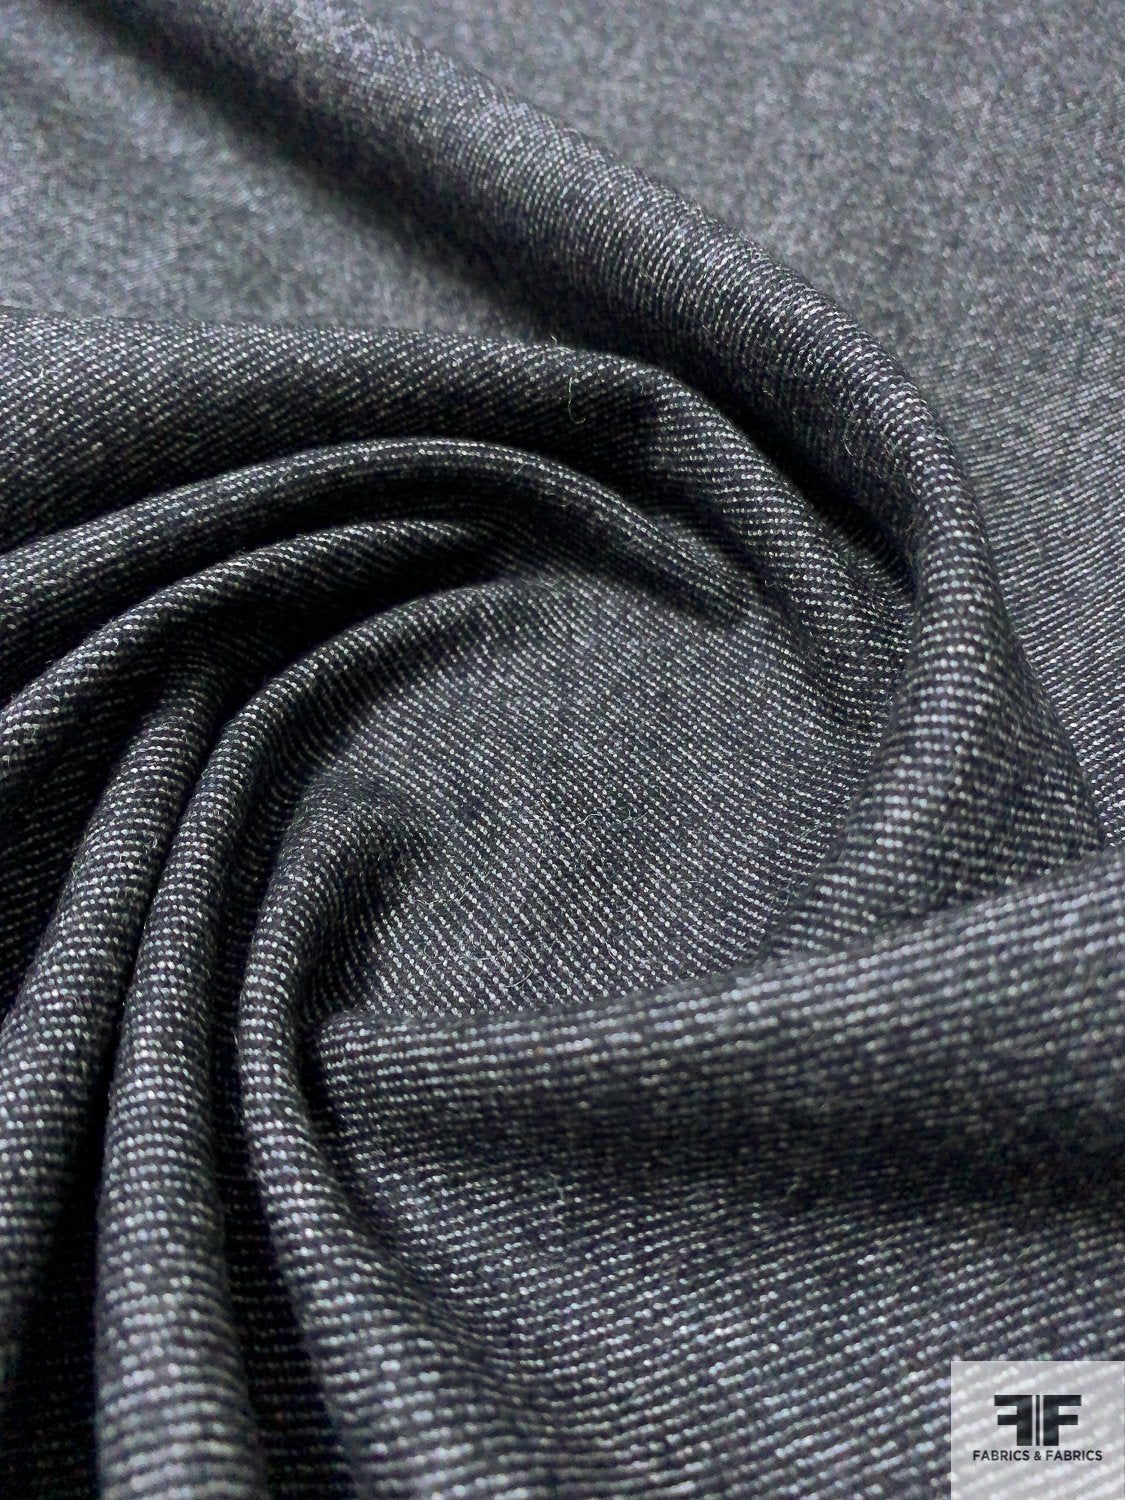 Twilled Flannel Wool Fabric 45%wool,30%polyester,25%viscose $4.2